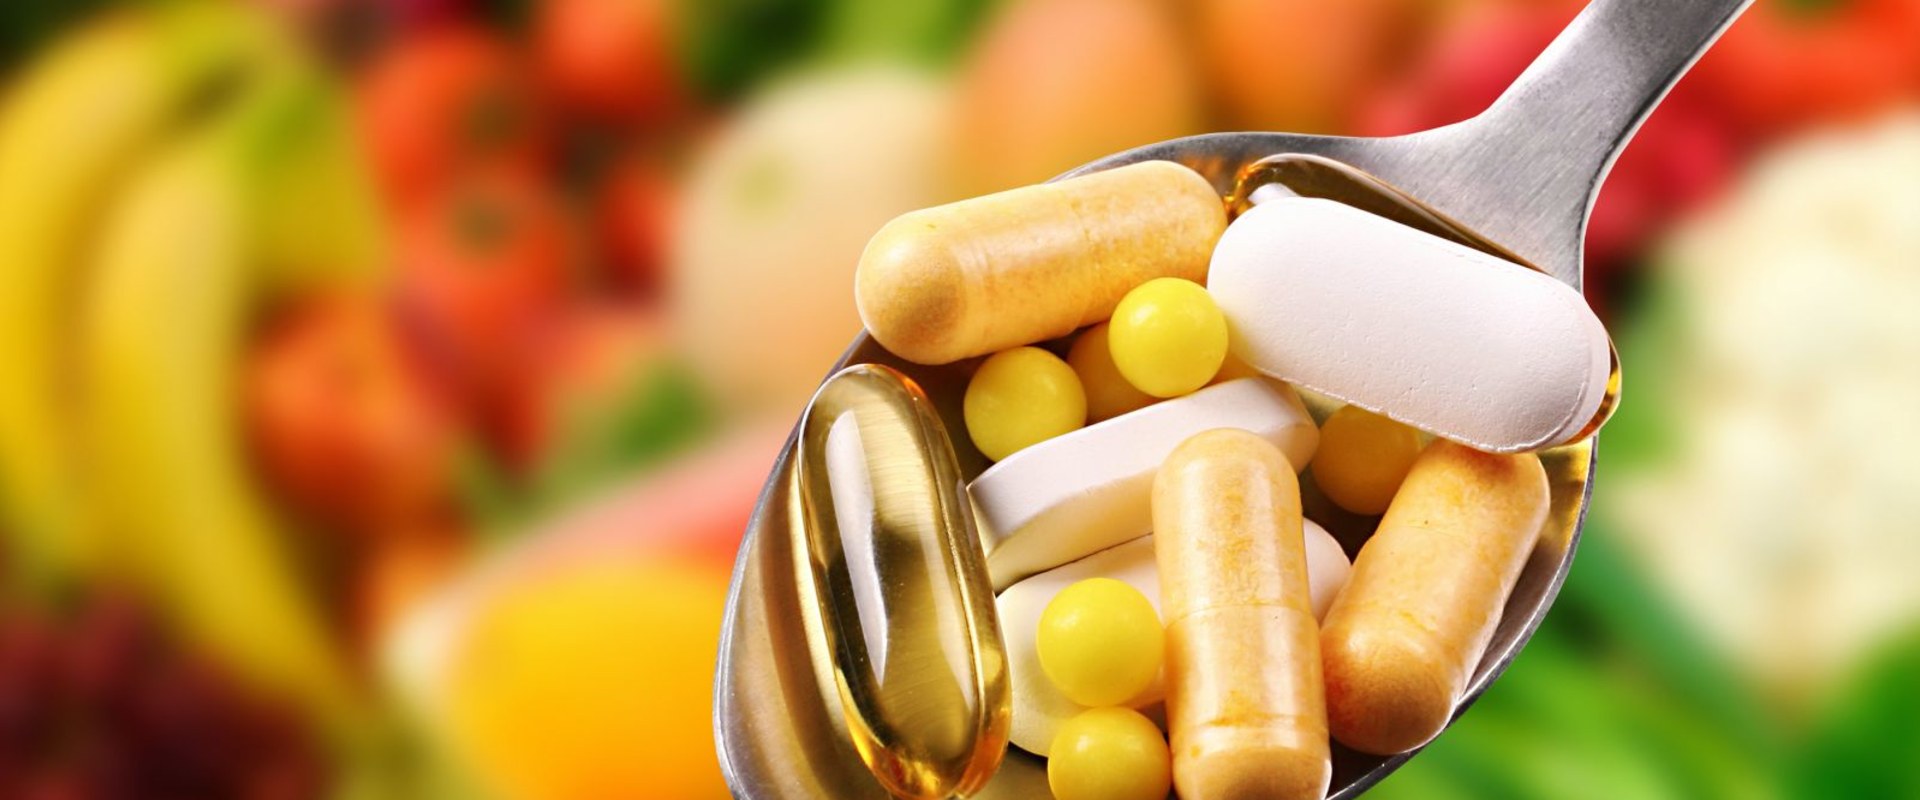 Safety Considerations for Taking Dietary Supplements: A Guide for Optimal Health